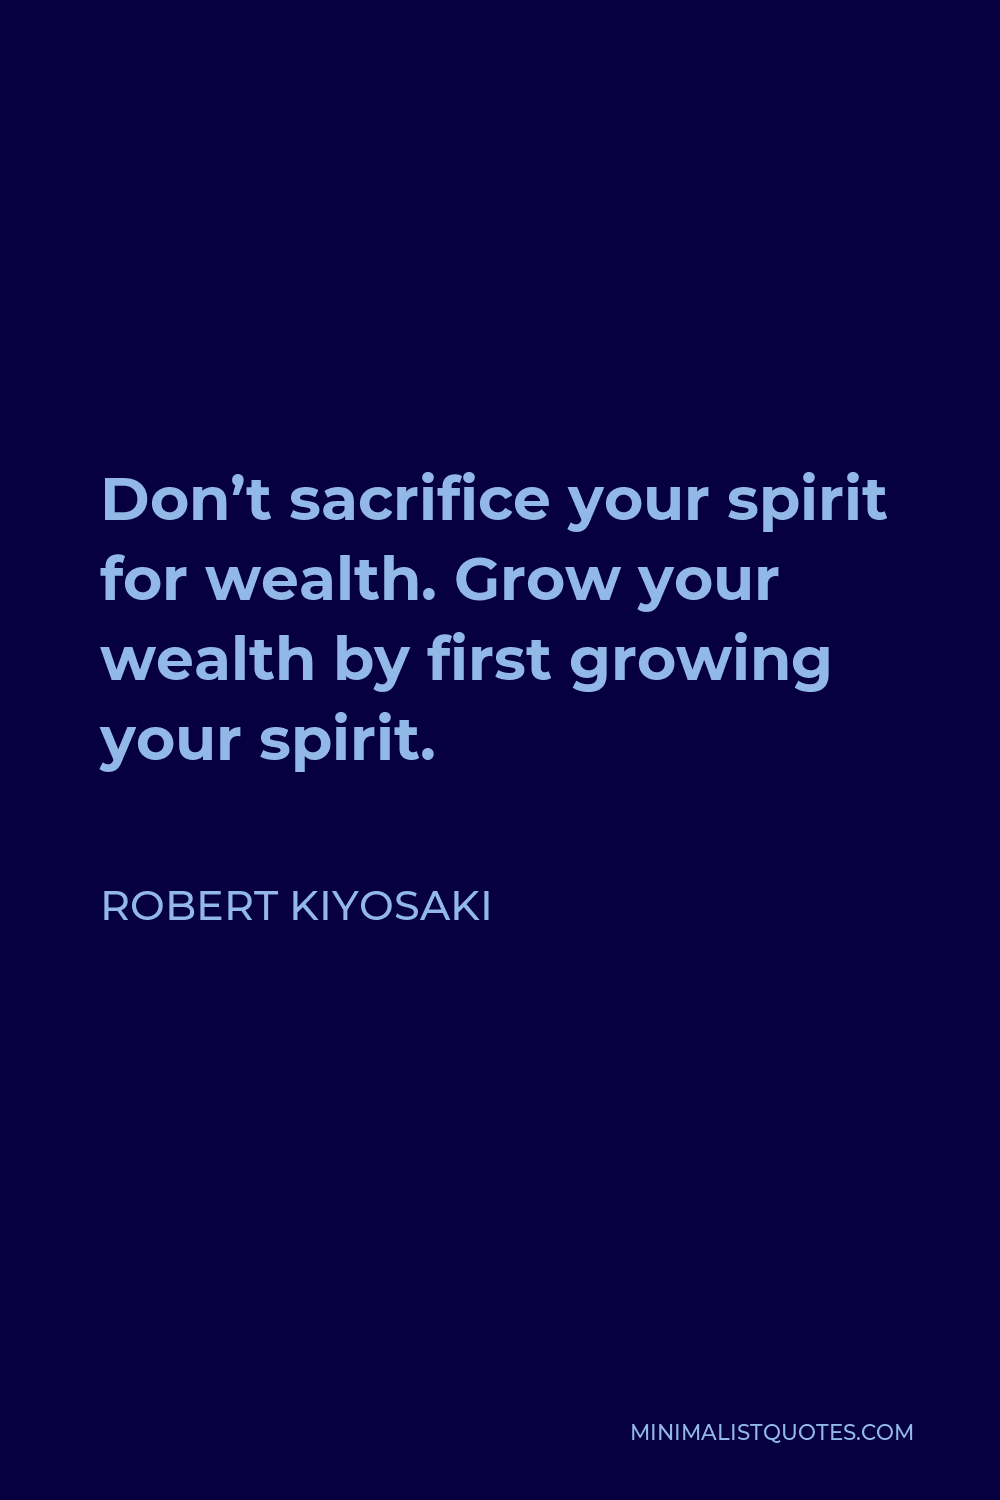 Robert Kiyosaki Quote - Don’t sacrifice your spirit for wealth. Grow your wealth by first growing your spirit.